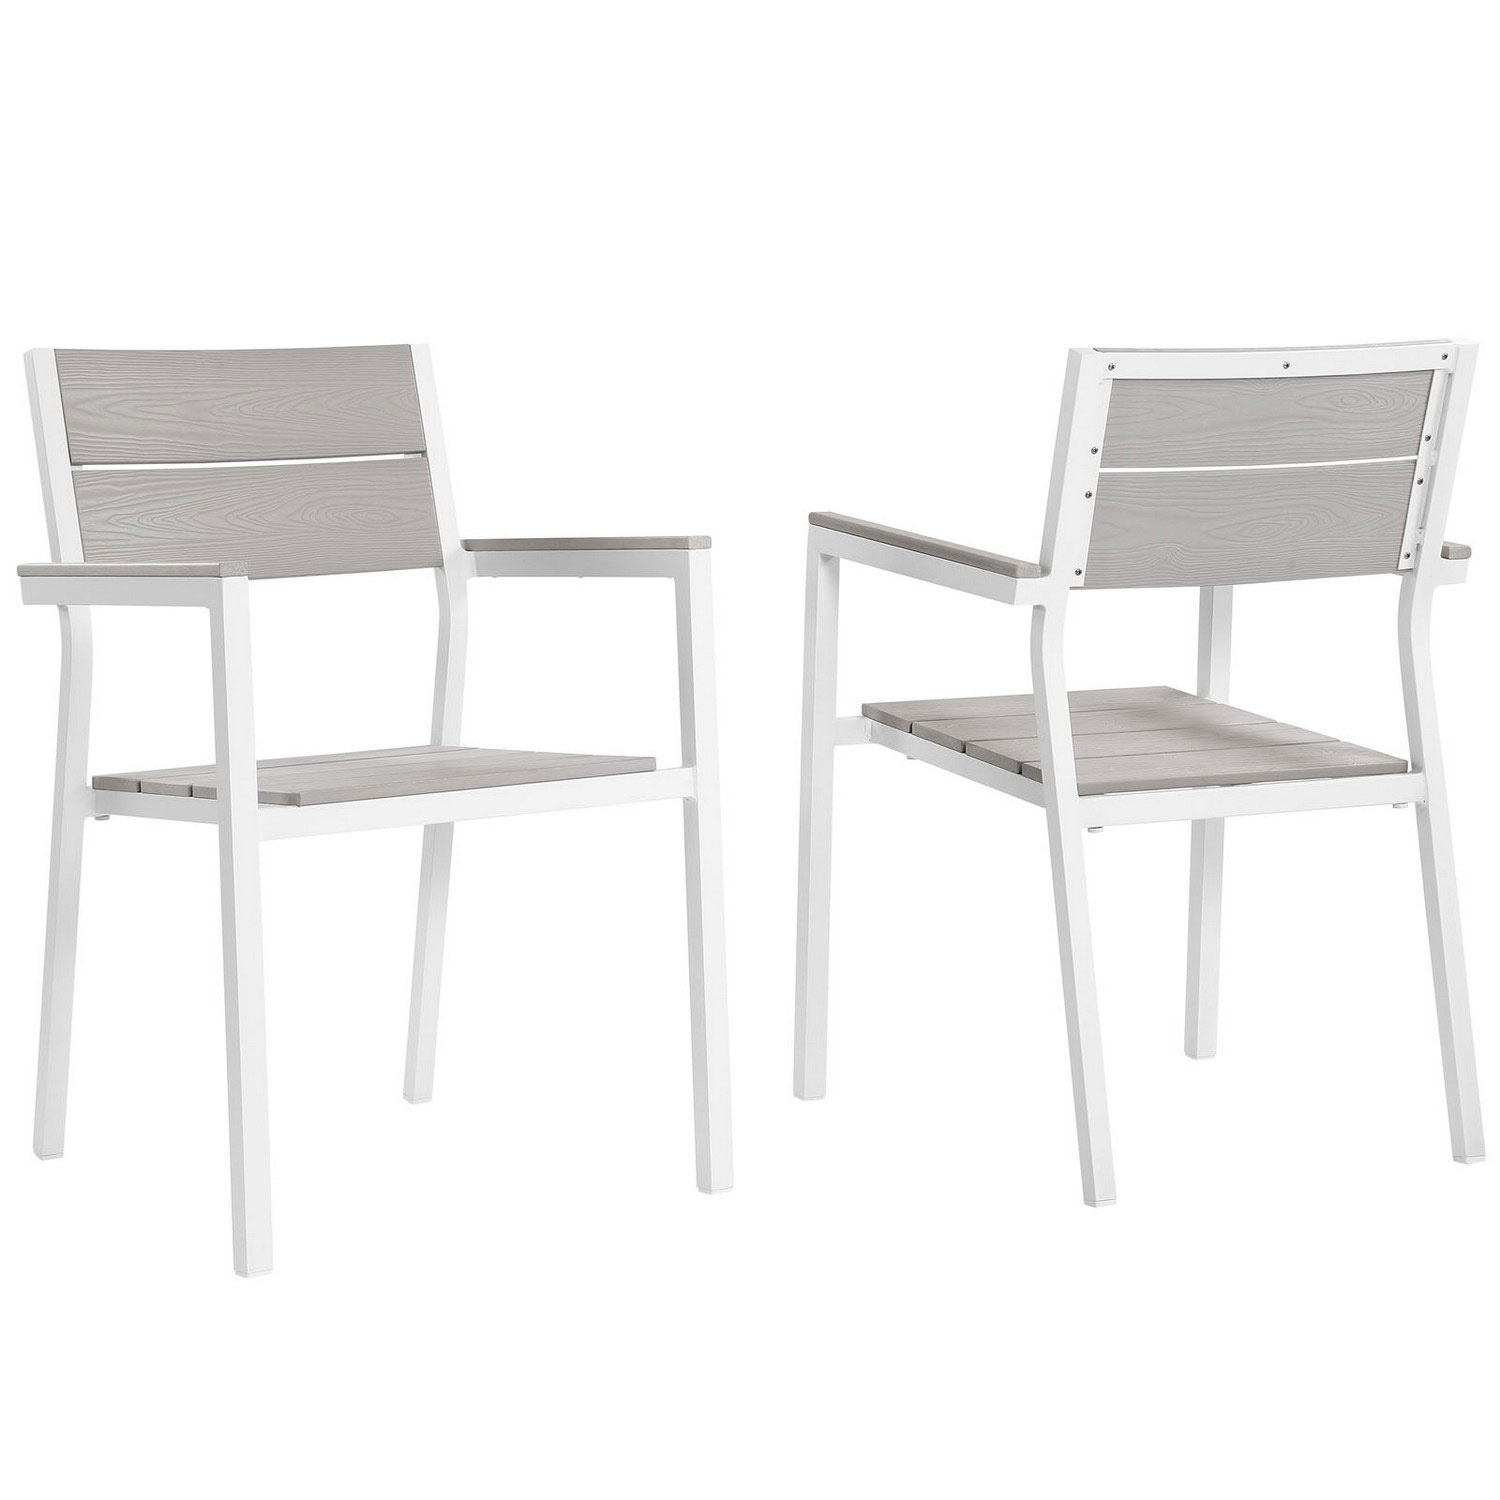 Modway Maine Dining Armchair Outdoor Patio Set of 2 - White/Light Gray